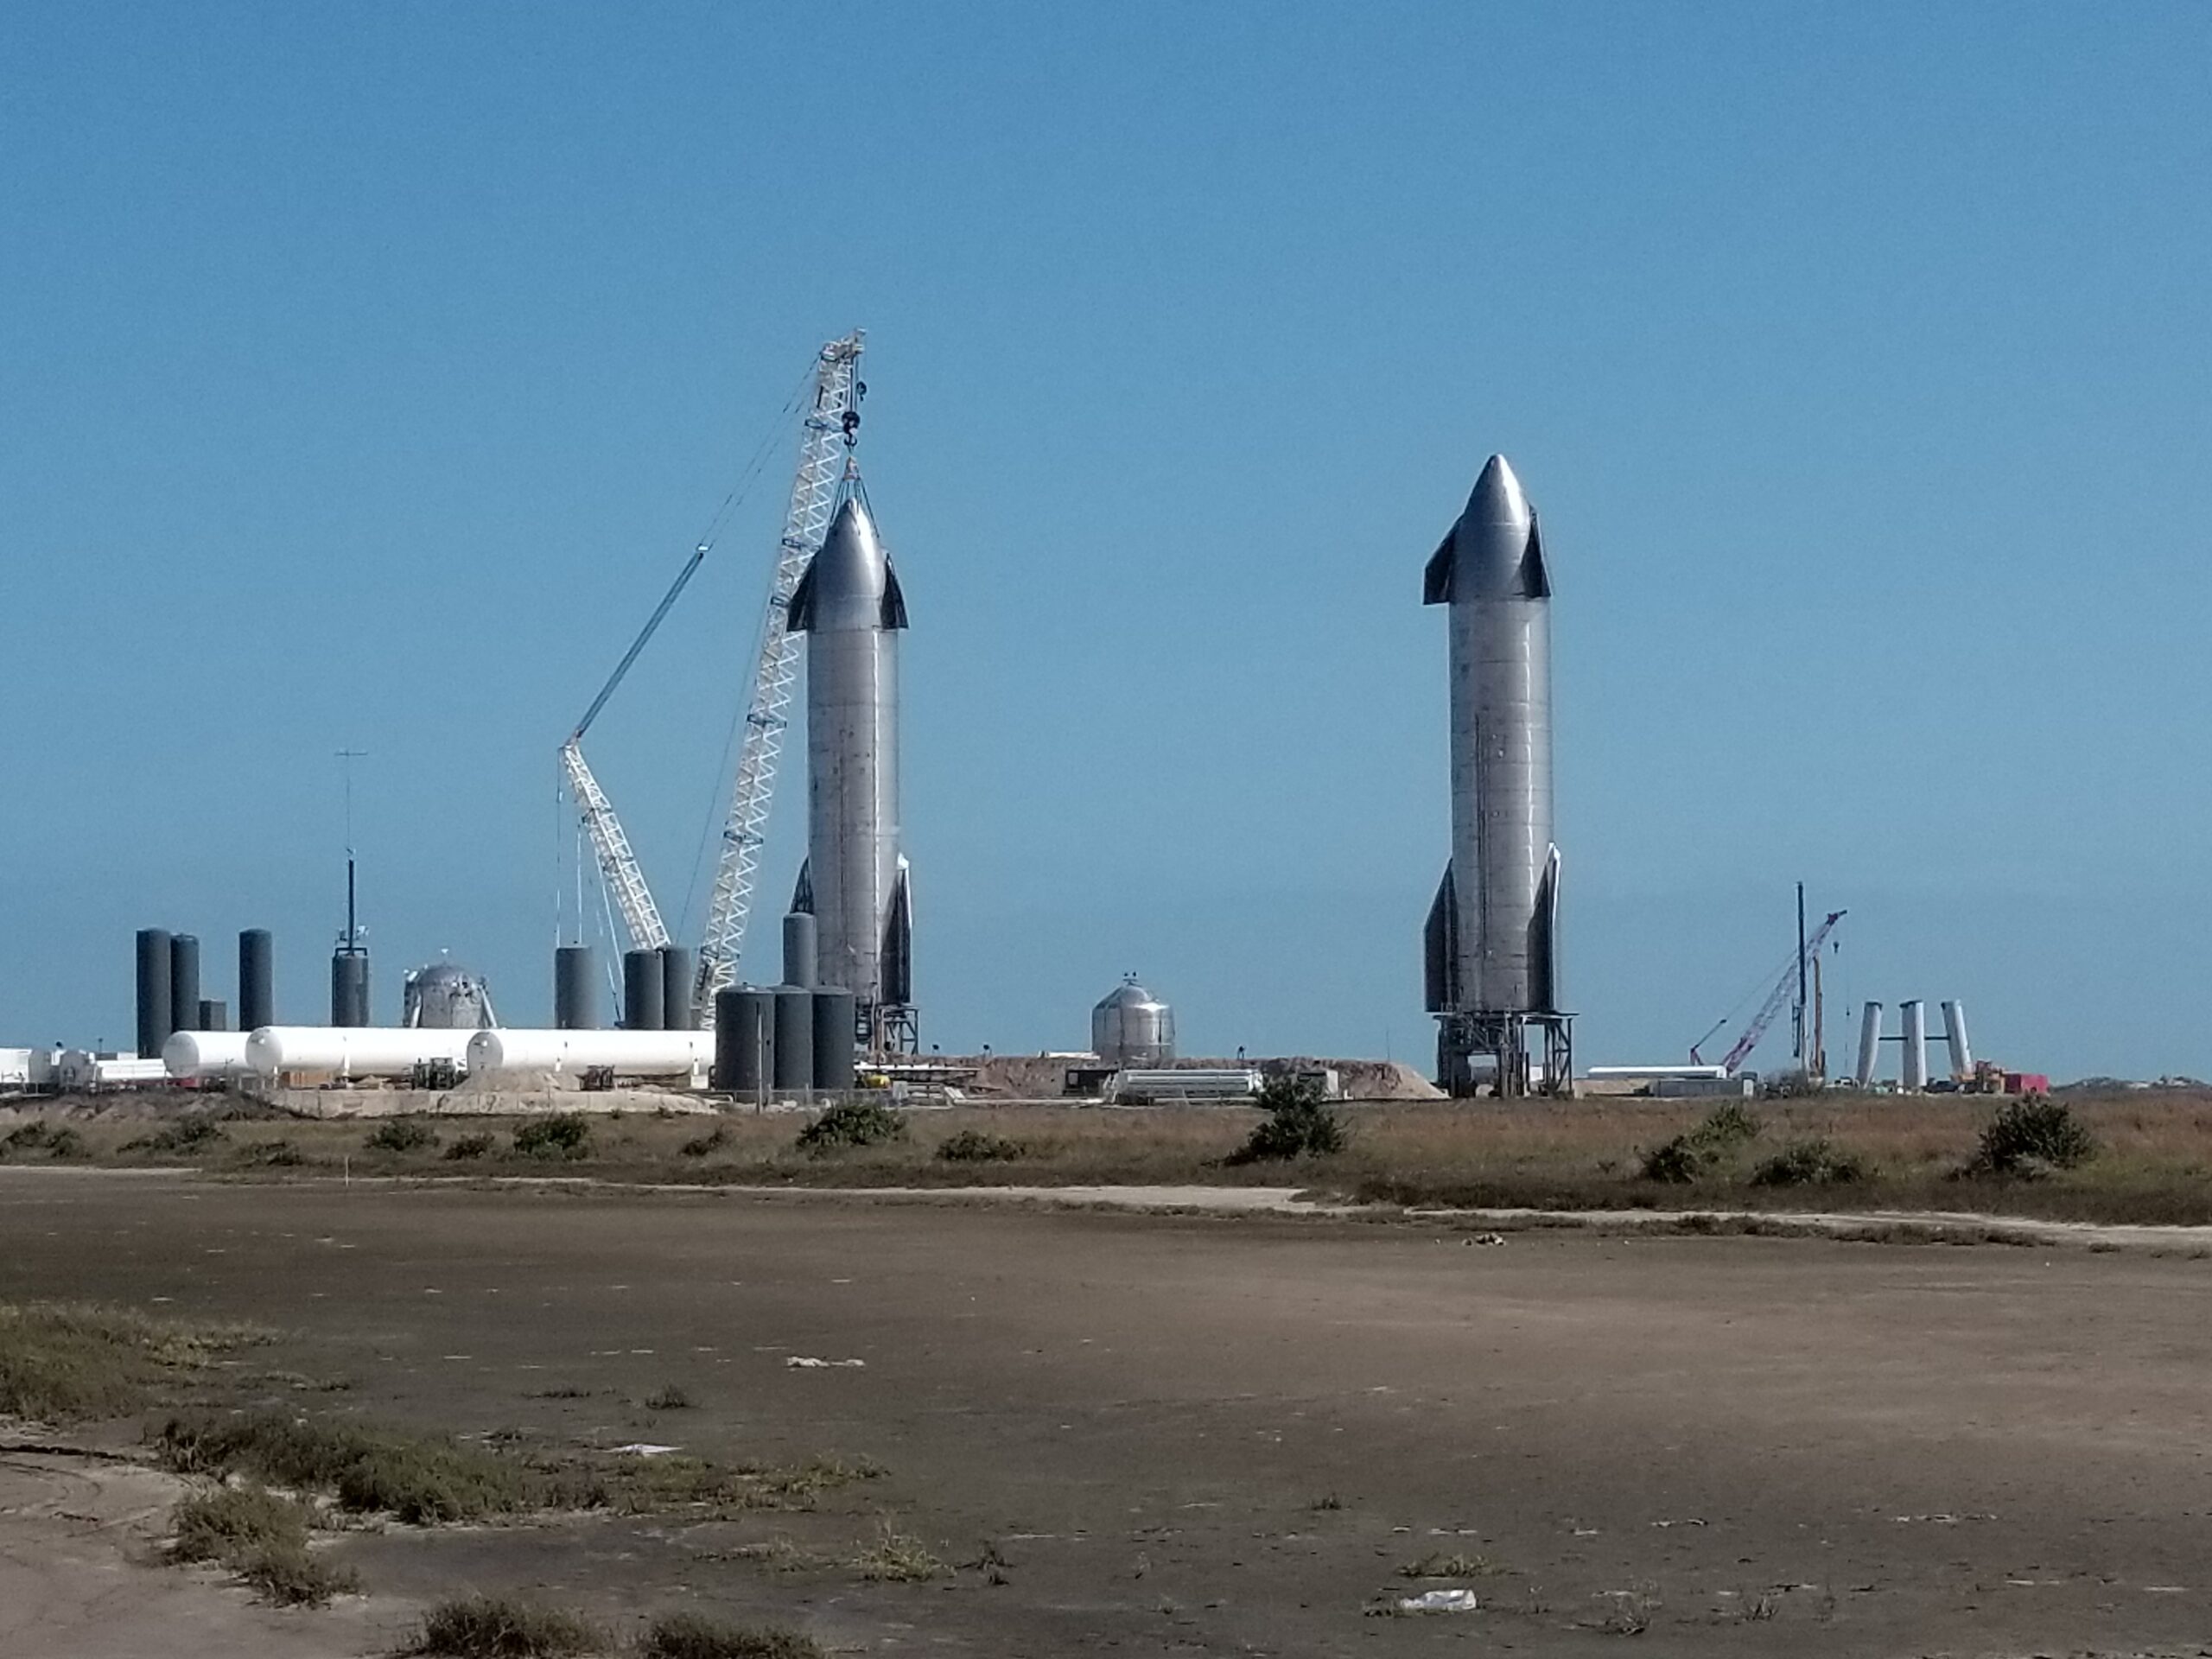 SpaceXFacility2